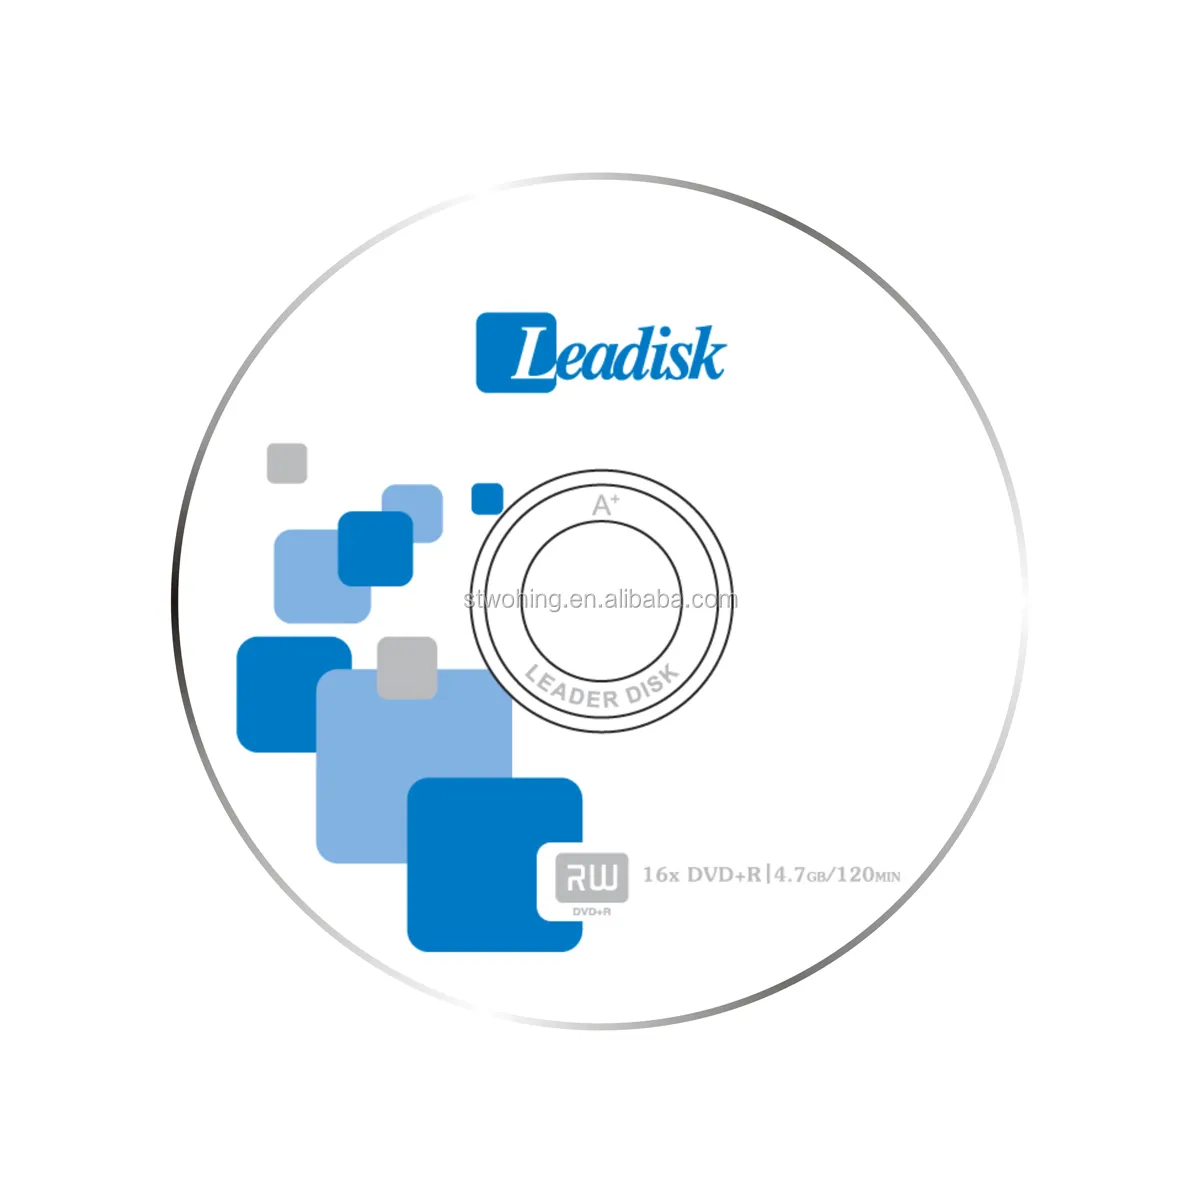 Leadisk blank dvd-r/blank dvdr/wholesale/blank dvd 50pcs spindle/shrink wrap with clear wheel